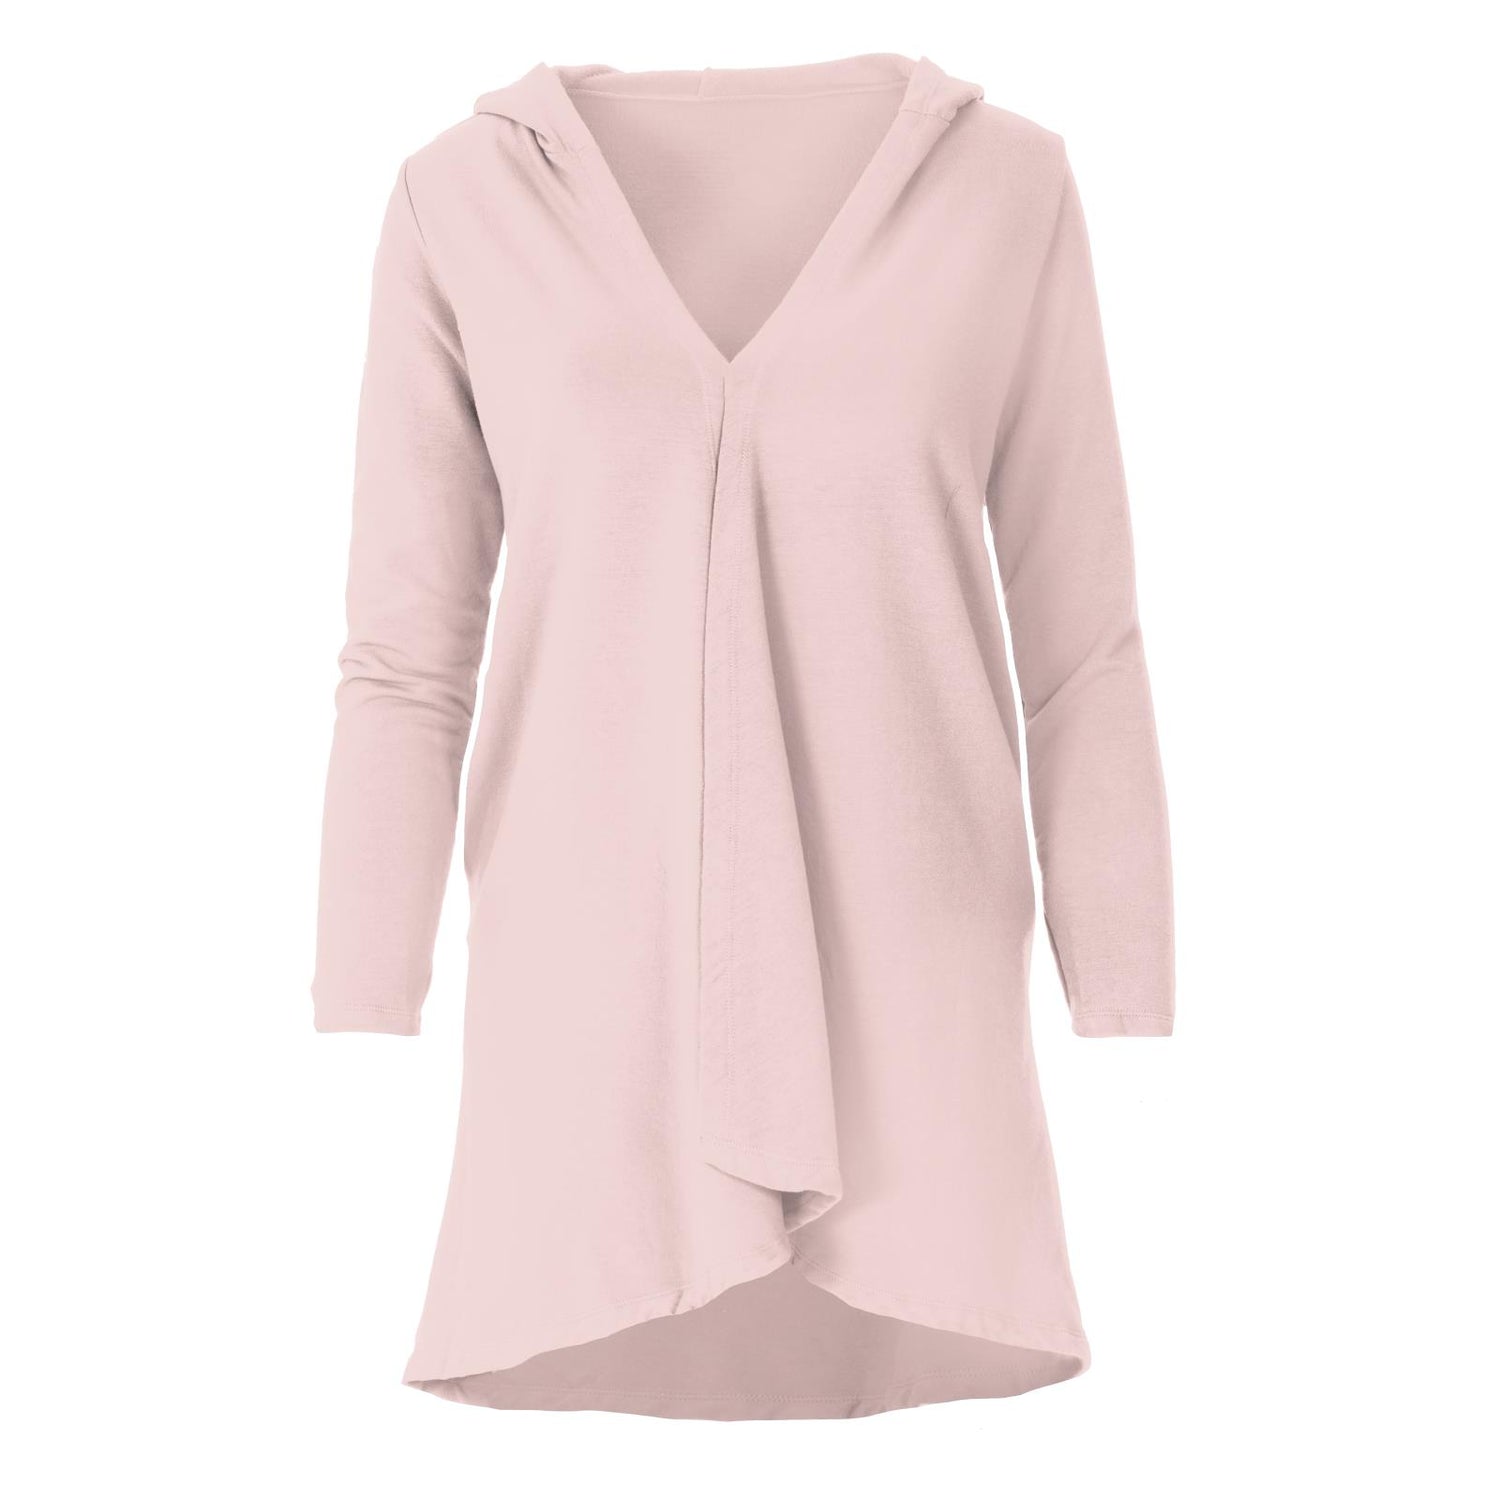 Women's Fleece Hooded Cardigan with Pockets in Baby Rose